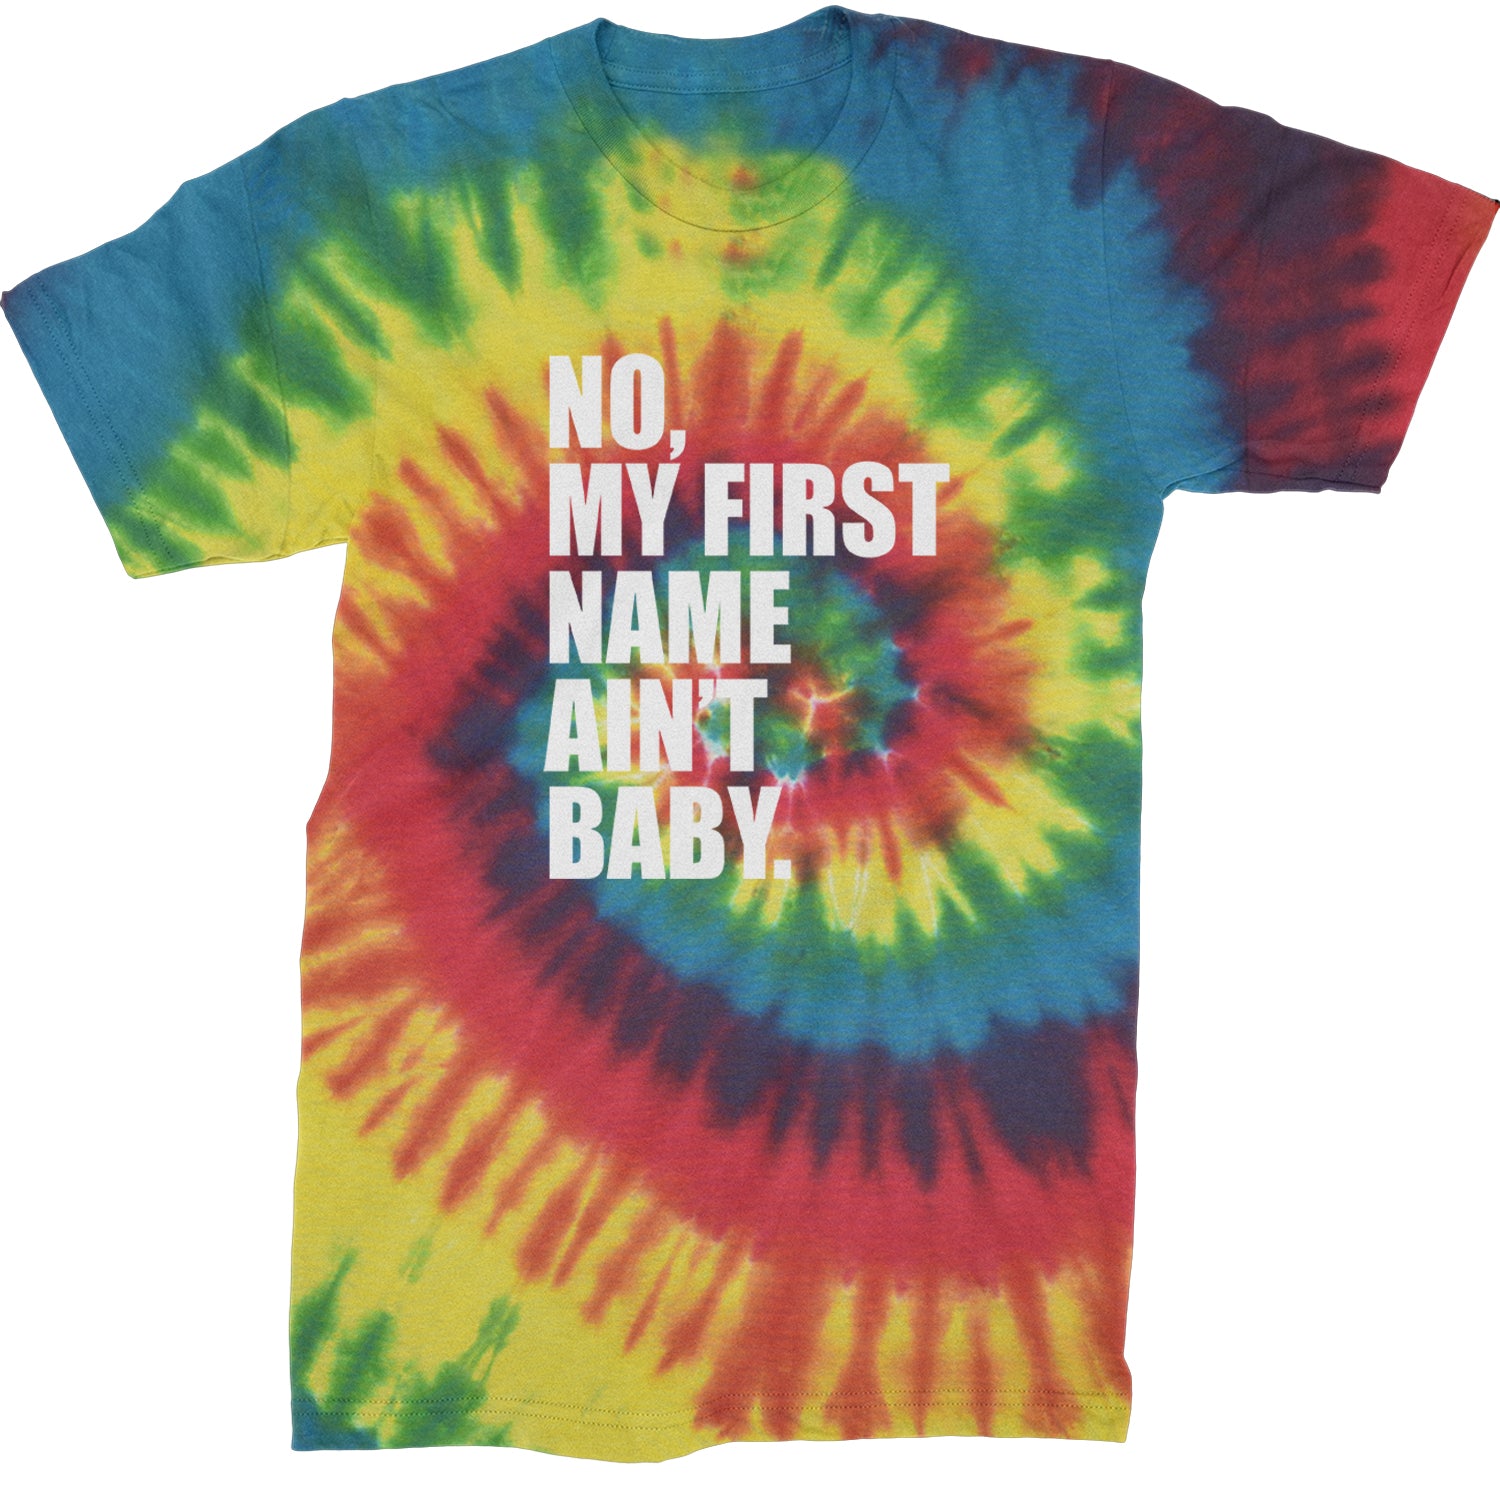 No My First Name Ain't Baby Together Again Mens T-shirt Tie-Dye Rainbow Reactive